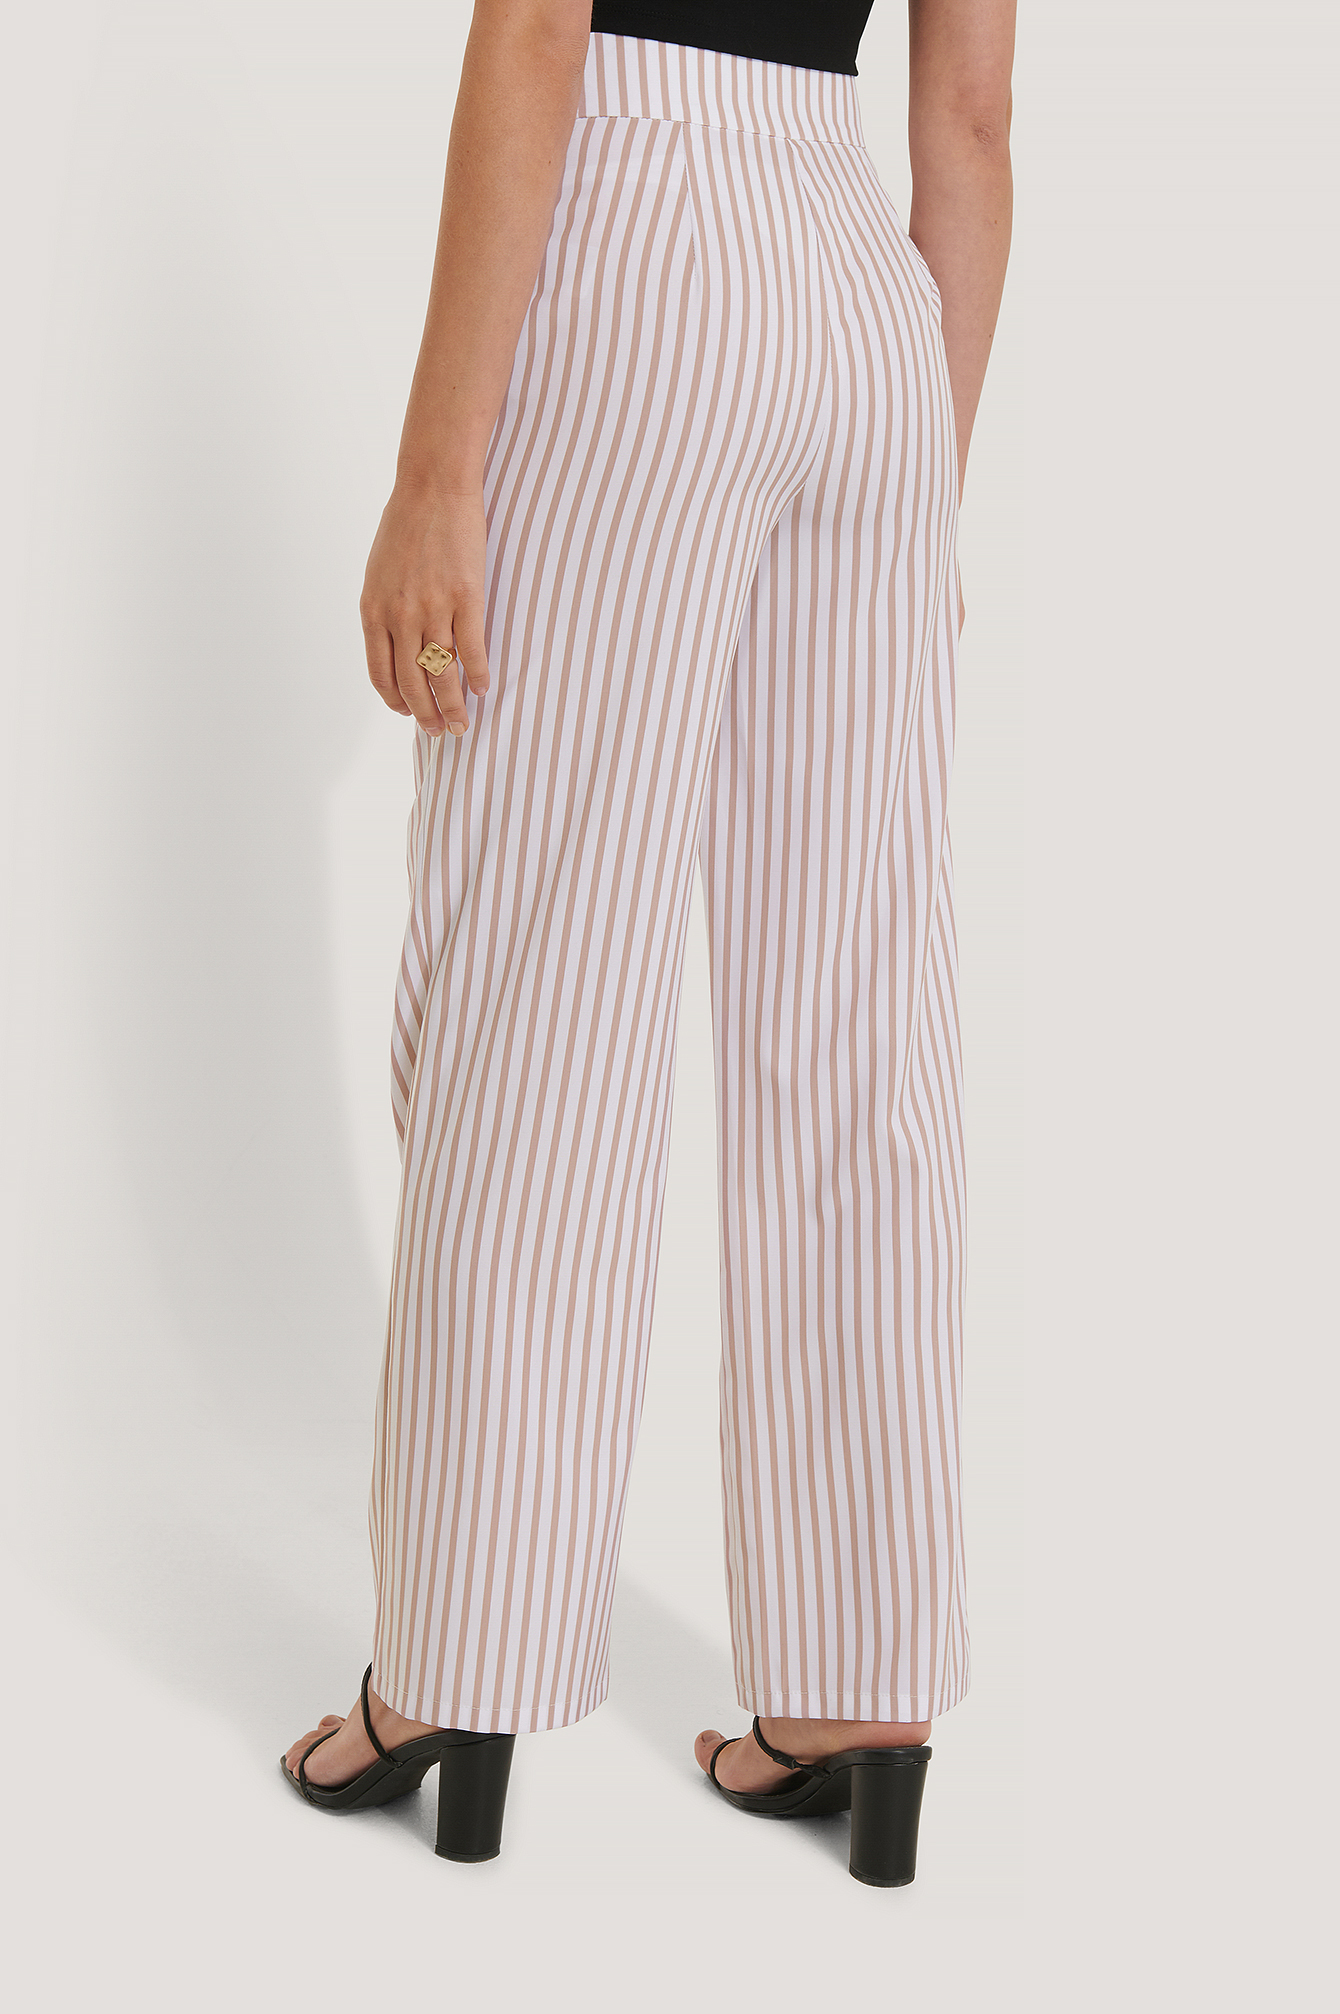 Striped trousers | Order pinstriped trousers from NA-KD | na-kd.com